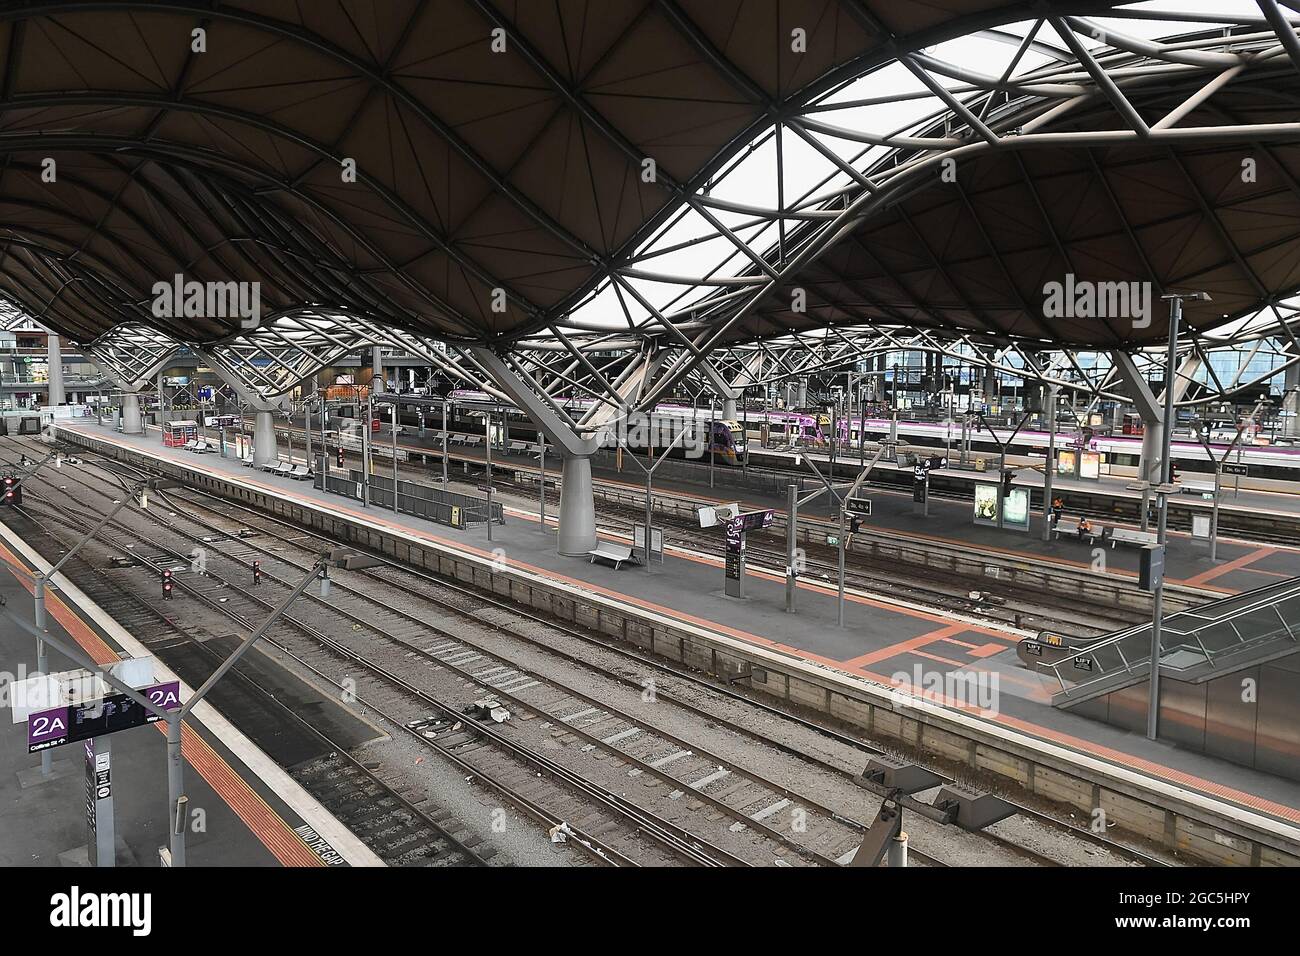 Melbourne, Australia, 7 August, 2021. An empty Spencer Street Station on the first weekend of Melbourne's sixths lockdown COVID-19 lockdown that has been placed on the State of Victoria. Credit: Michael Currie/Speed Media/Alamy Live News Stock Photo